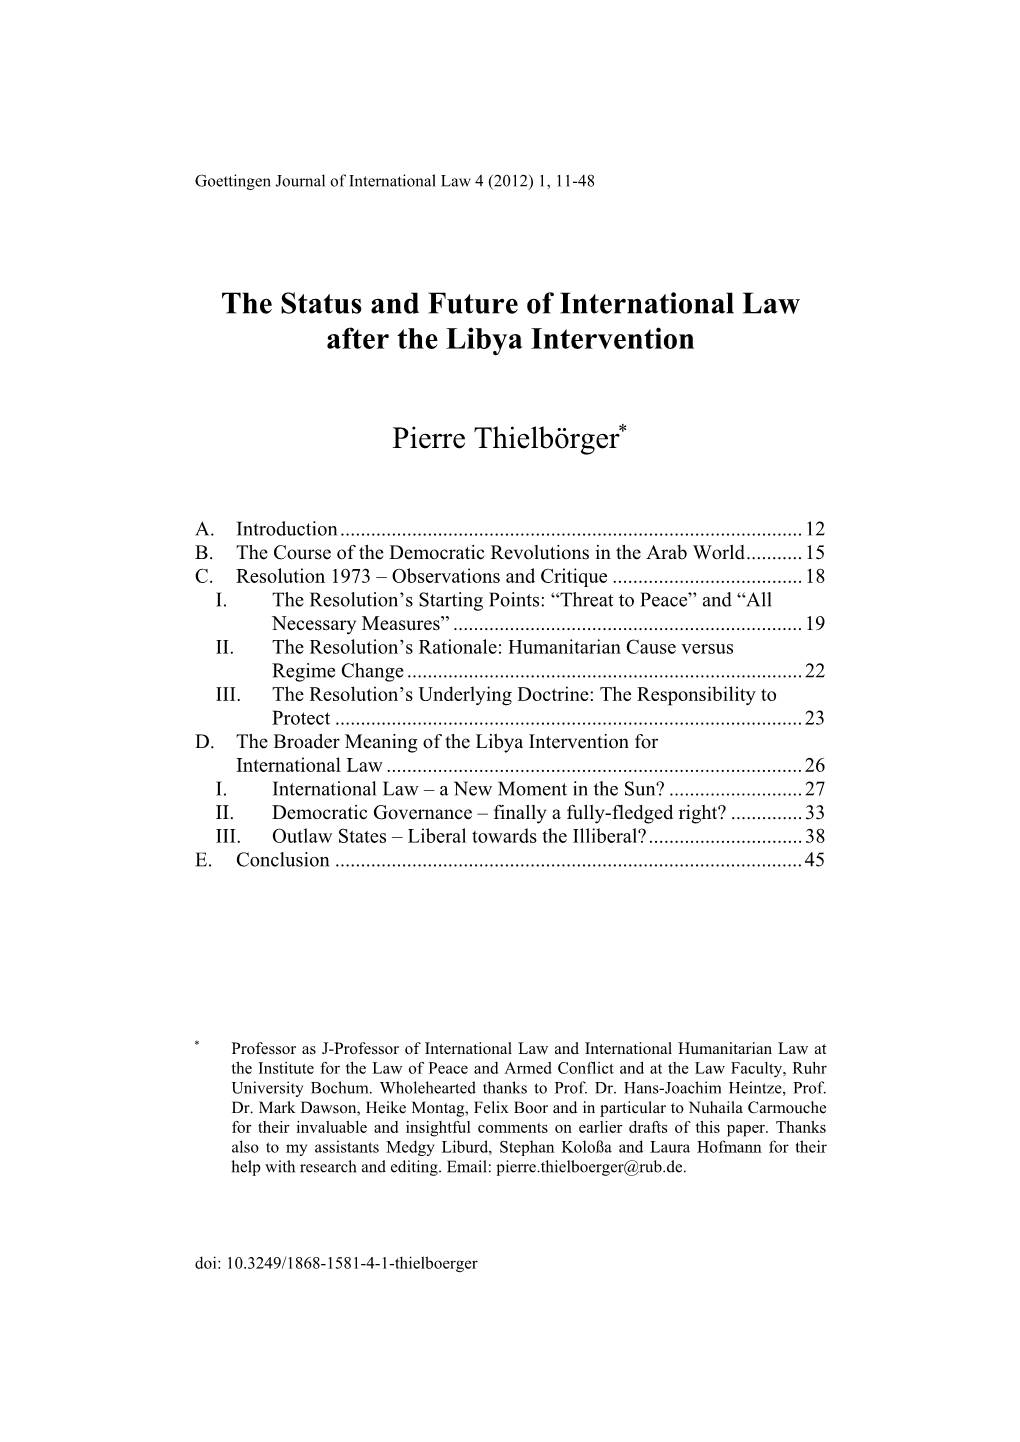 The Status and Future of International Law After the Libya Intervention